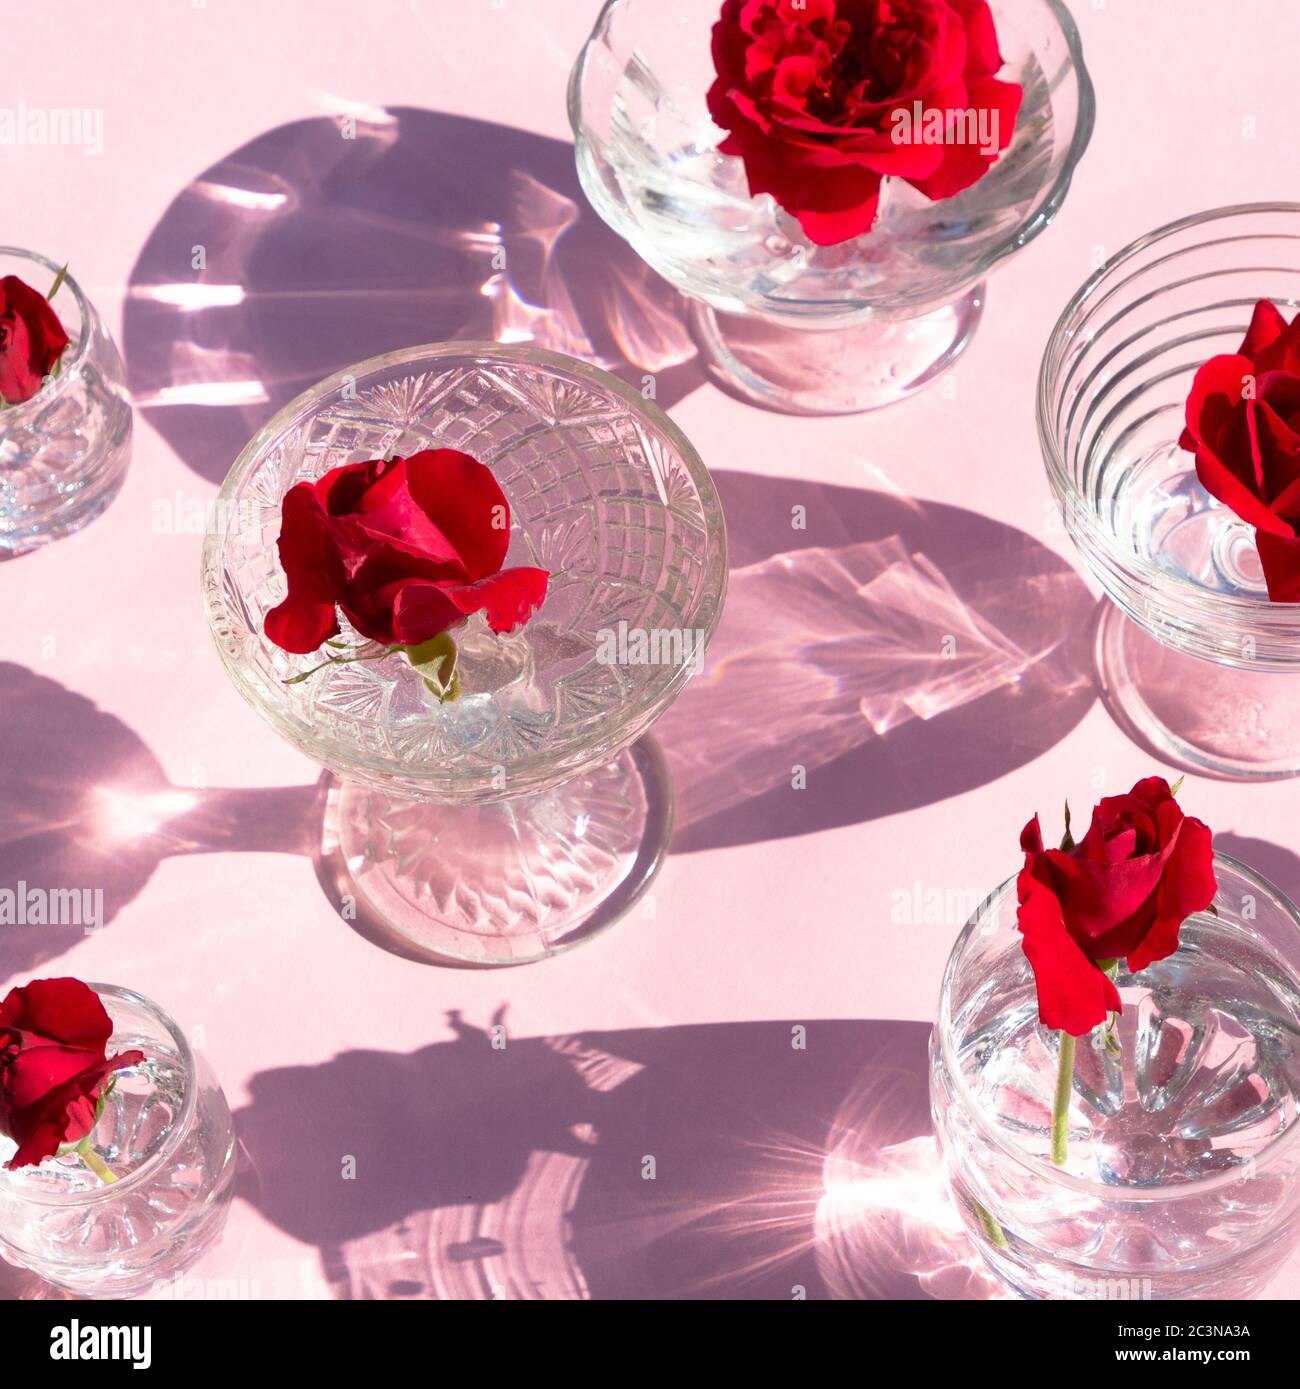 https://c8.alamy.com/comp/2C3NA3A/glasses-with-clear-water-and-red-roses-stand-on-a-pink-background-top-view-beautiful-creative-still-life-is-flooded-with-light-with-hard-shadows-and-2C3NA3A.jpg